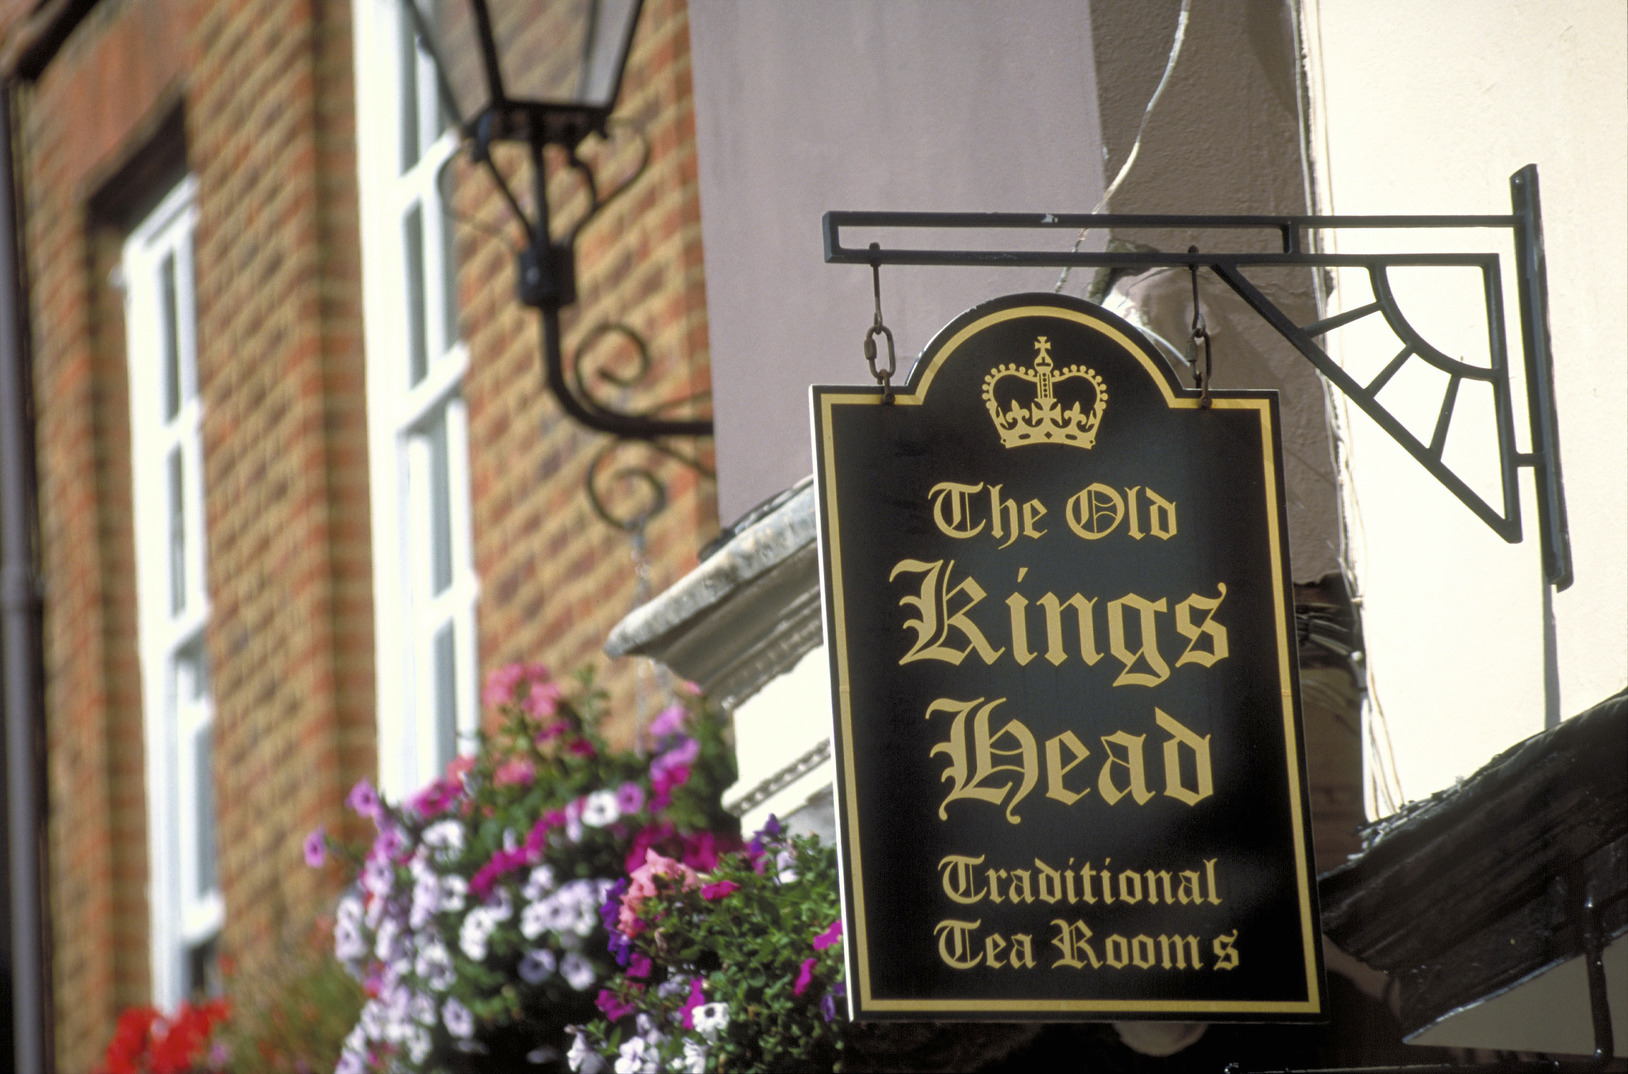 Jubilee - the old kings head traditional tea rooms sign, Windsor, Berkshire, England.